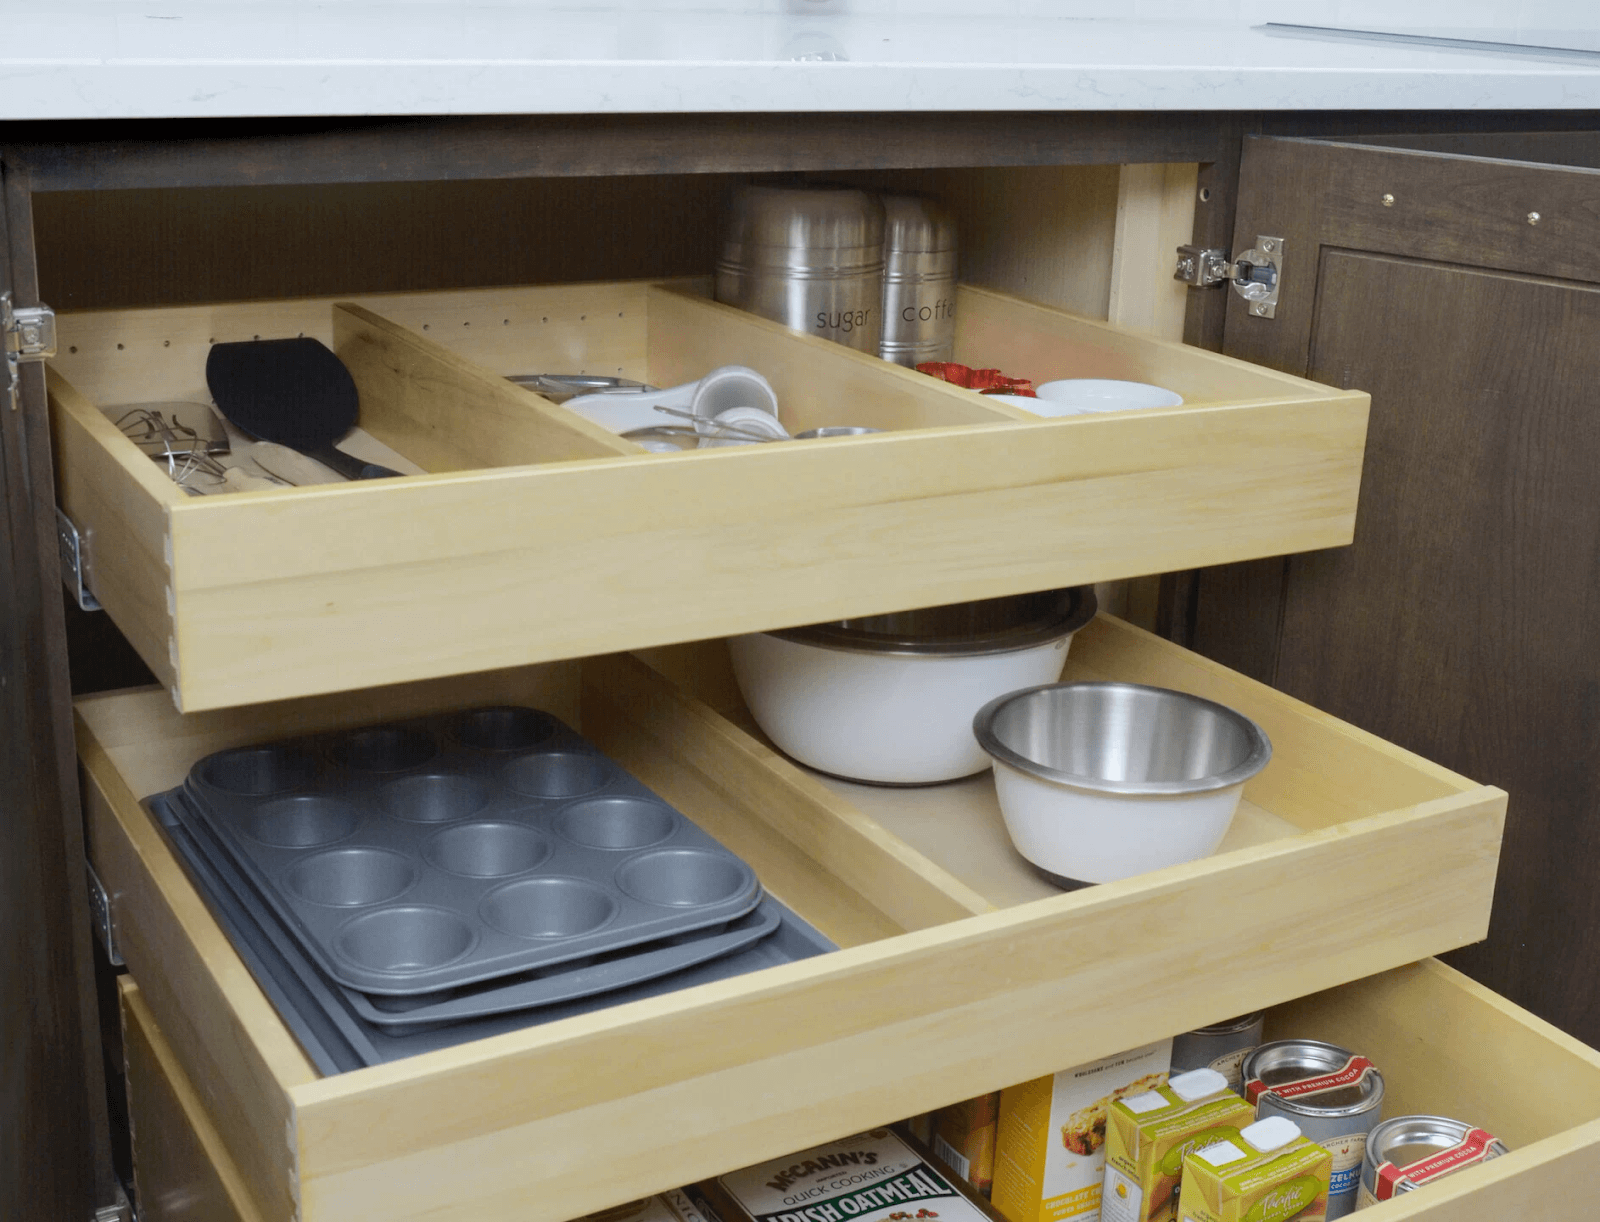 Drawer rollouts on a lower cabinet